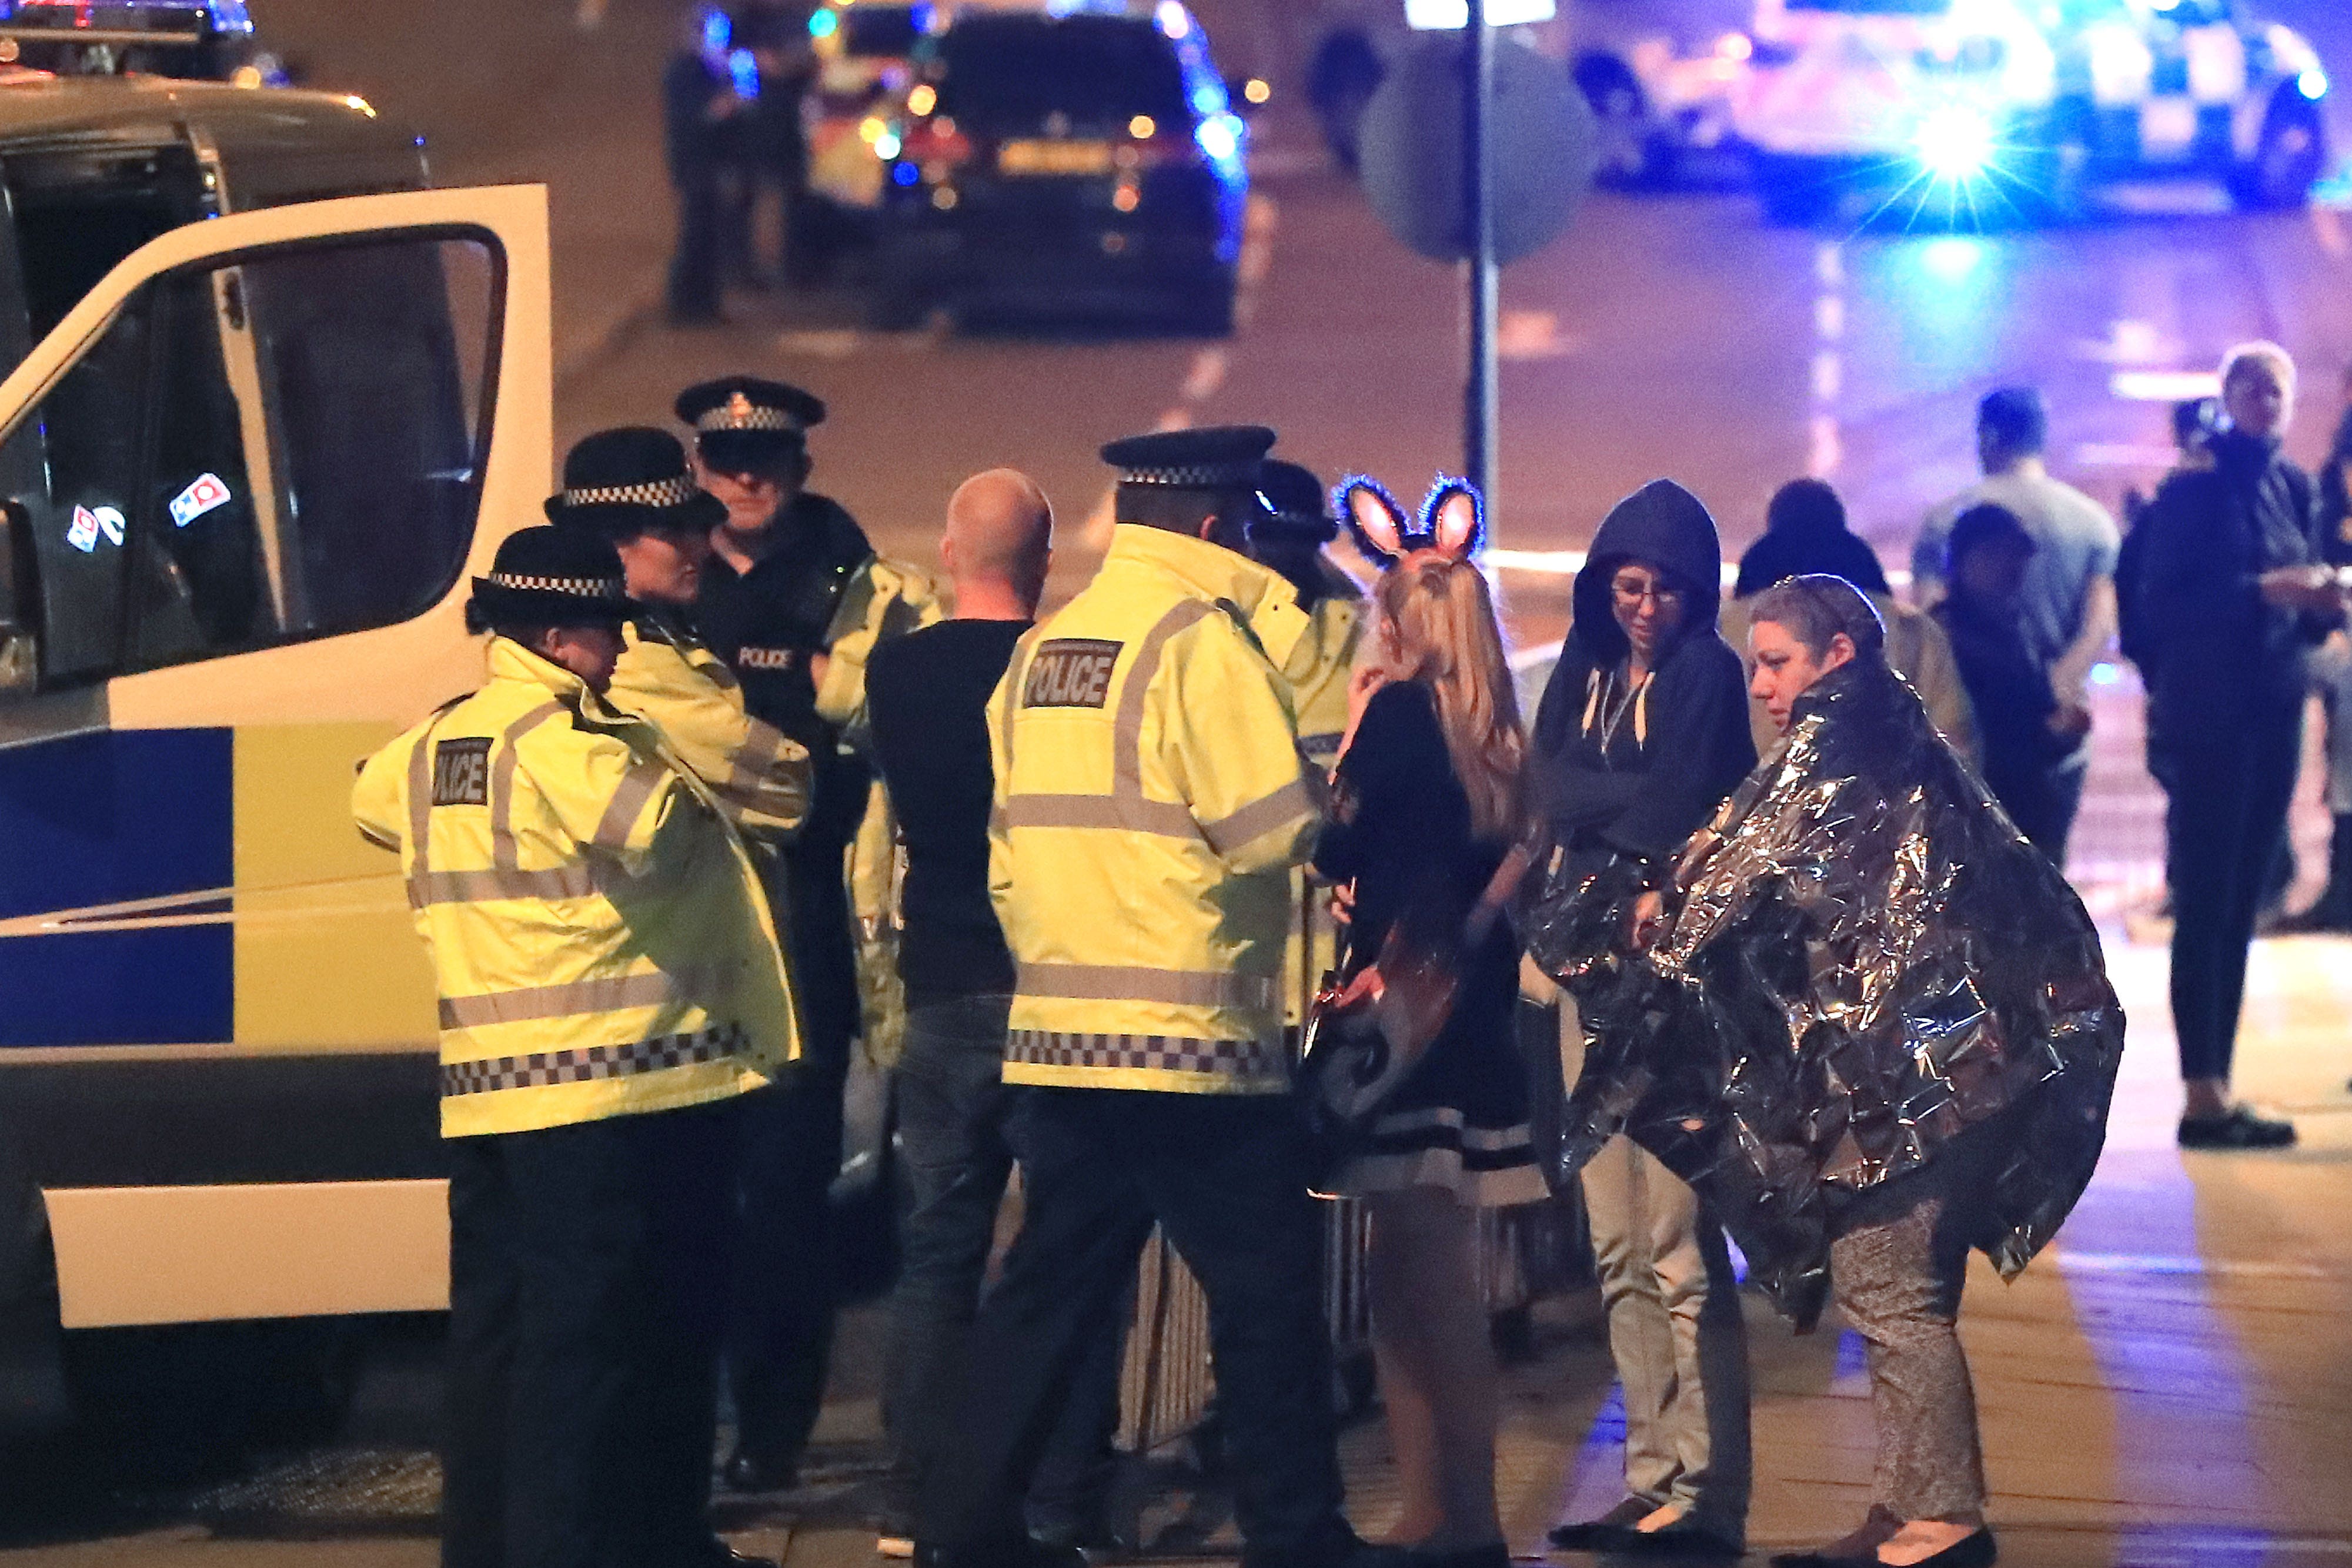 Police at Manchester Arena after a terror attack which killed 22 people